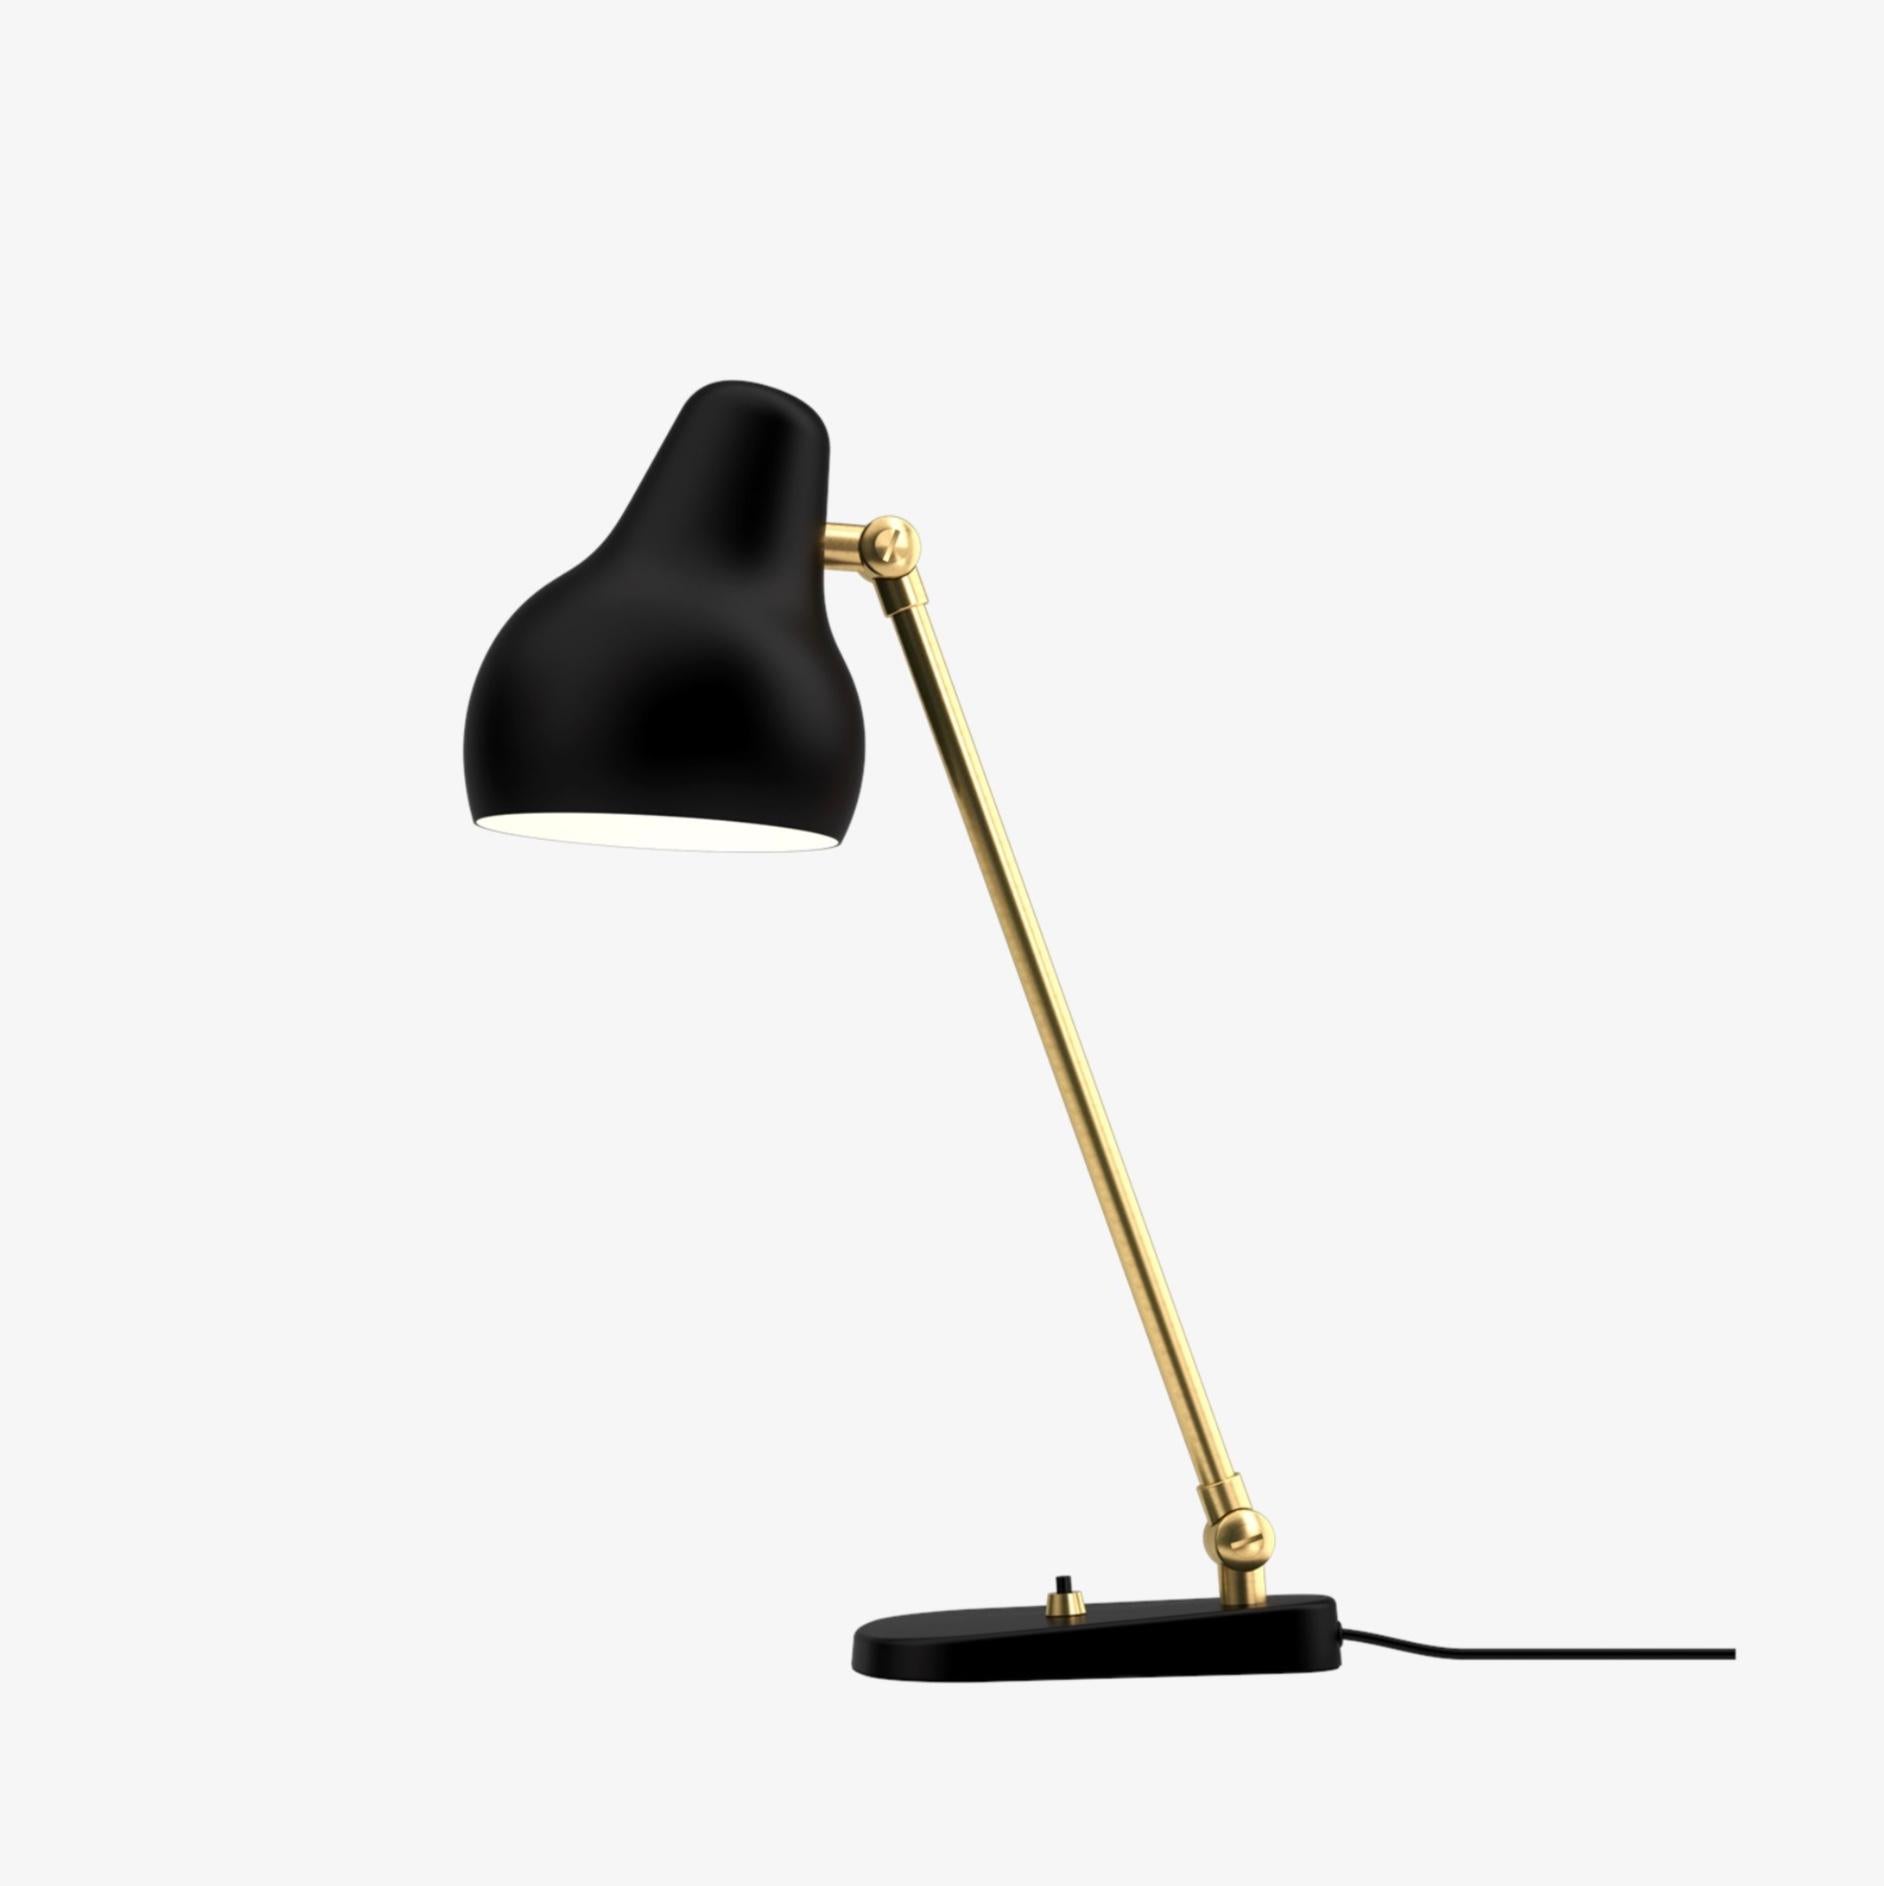 Vilhelm Lauritzen 'VL38' Table Lamp for Louis Poulsen. Designed in 1930. New, current production.

The VL38 table lamp was originally designed in the late 1930s by Vilhelm Lauritzen in partnership with Louis Poulsen for the construction of the